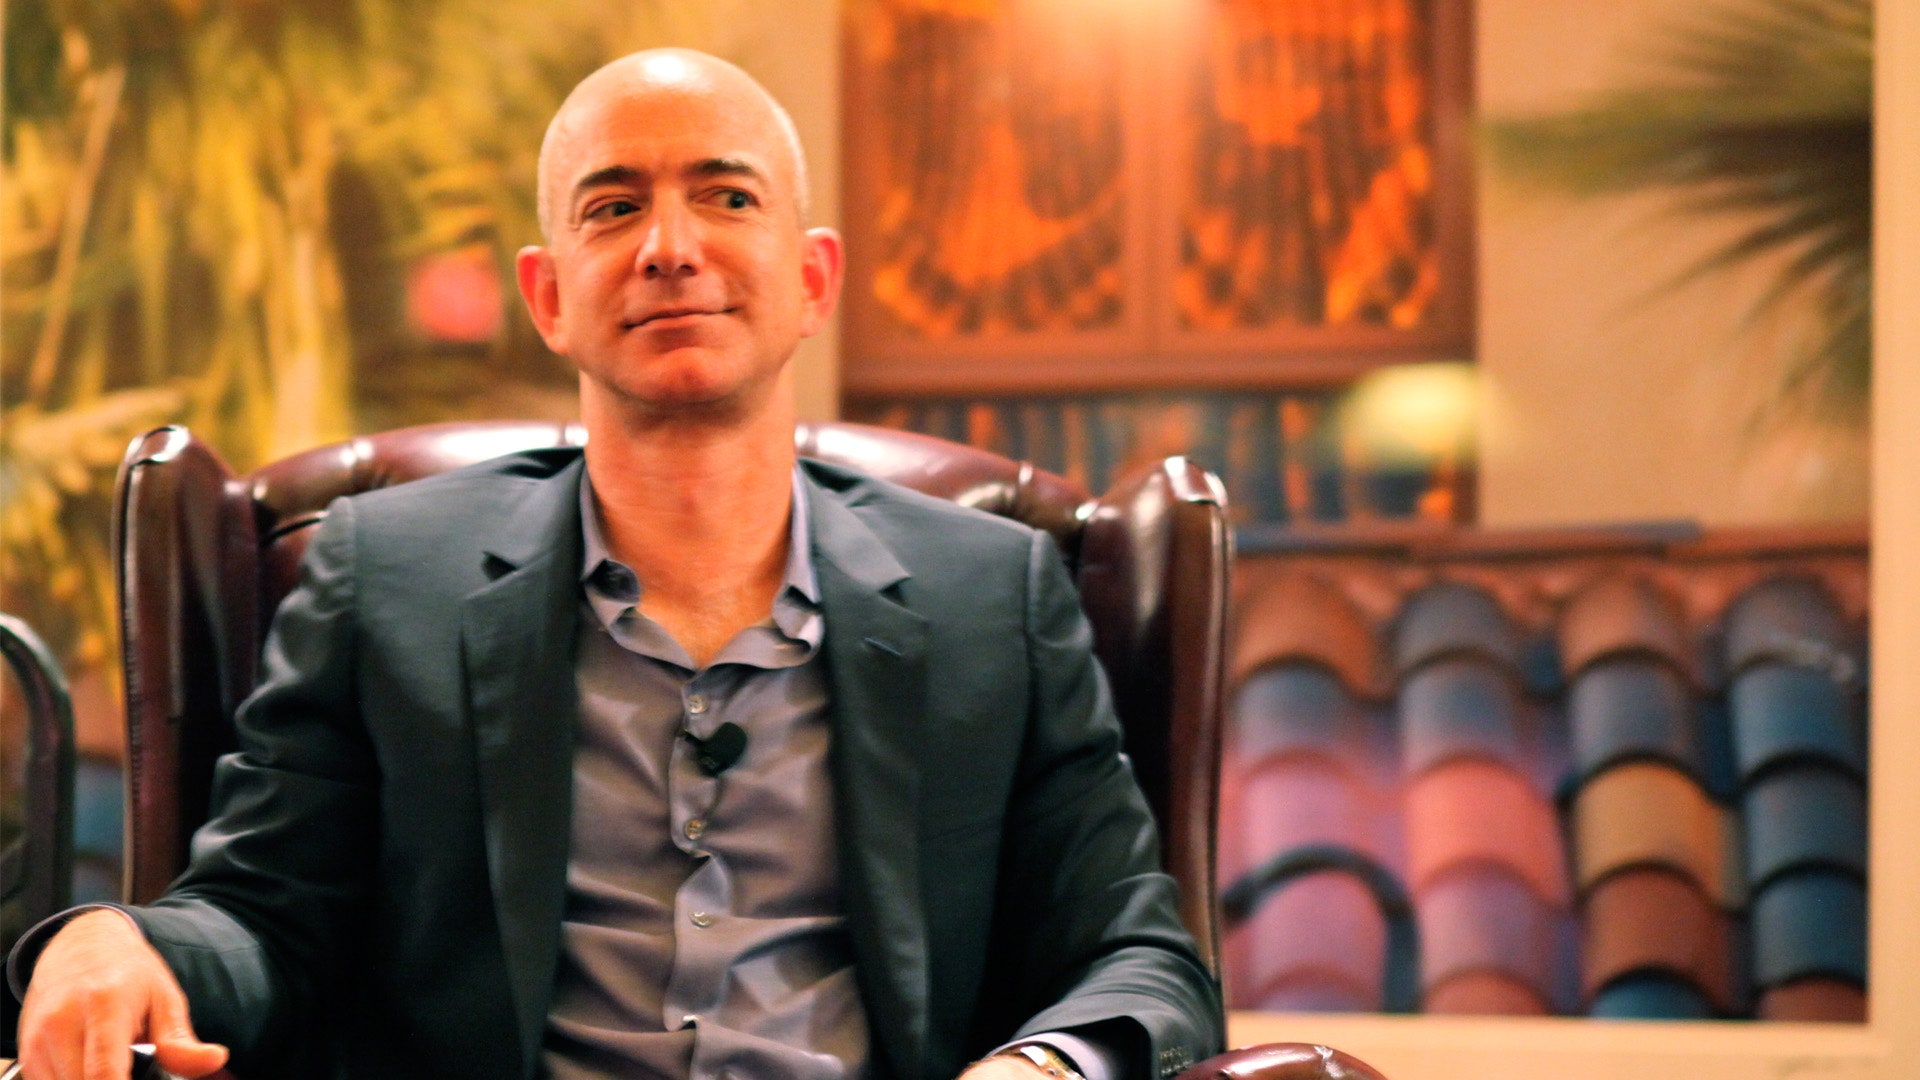 Jeff bezos bees the richest man in the world with billion fortune gq india